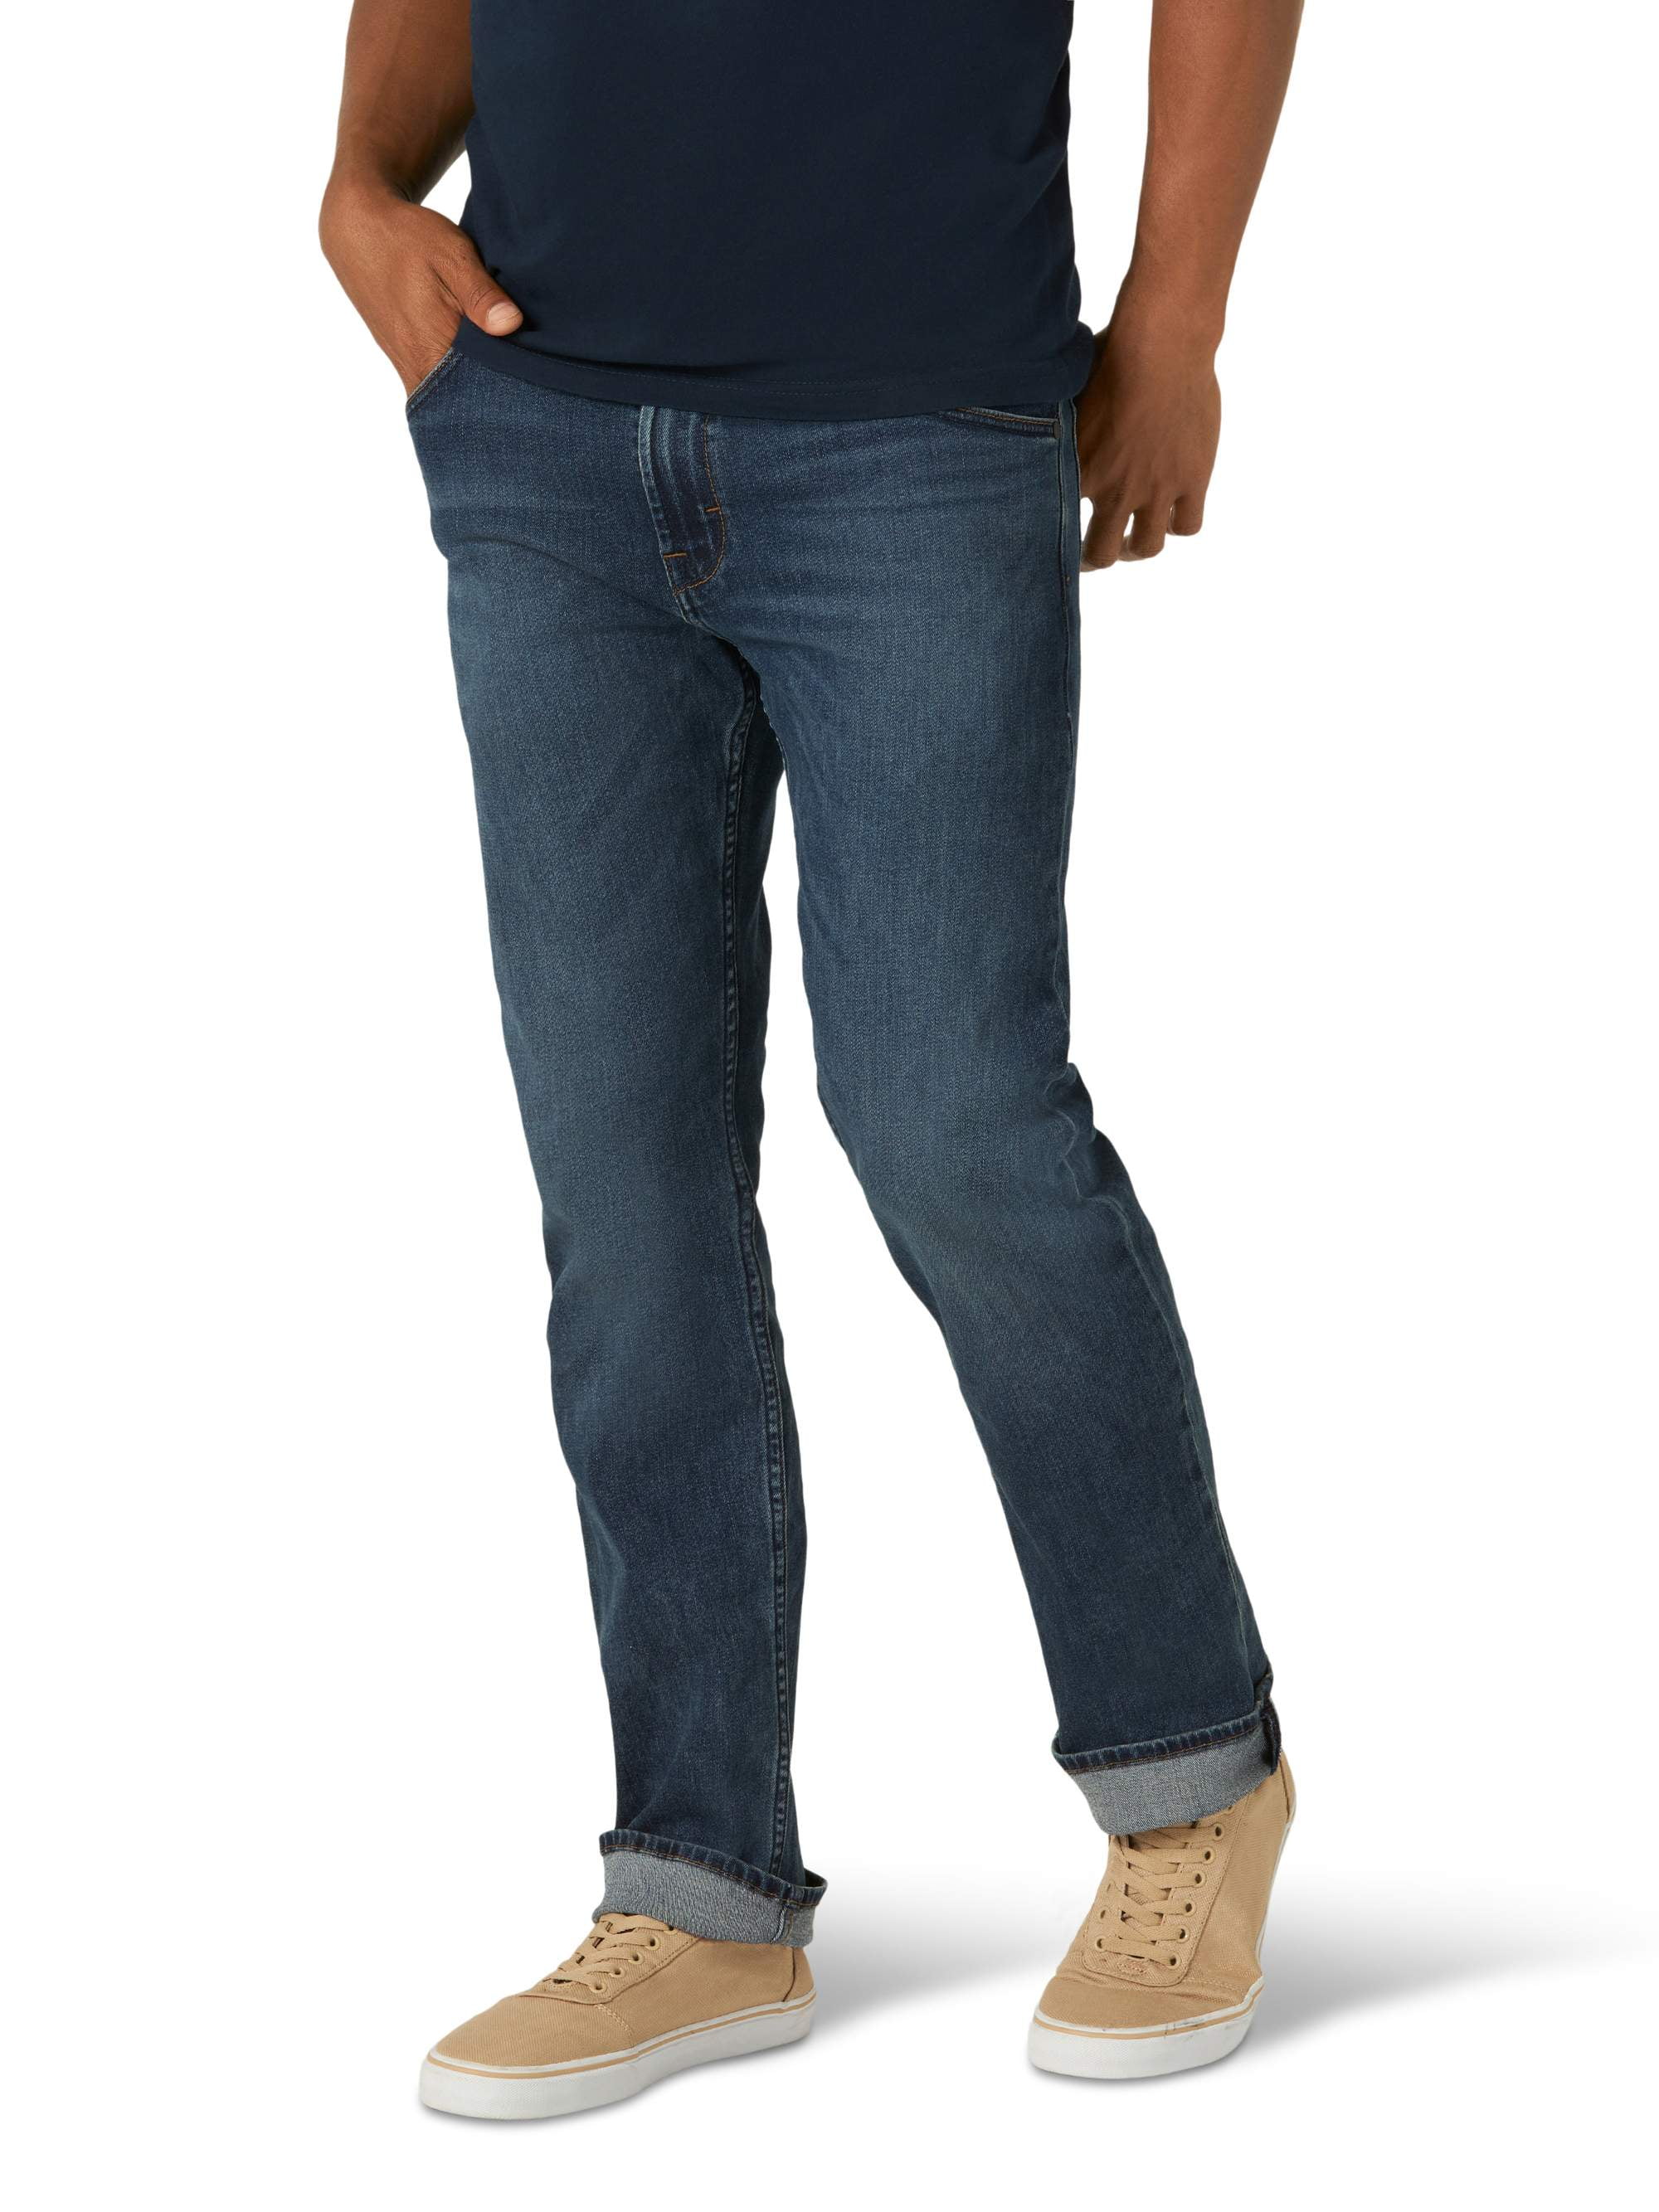 Wrangler Men's Weather Anything Straight Fit Jean - Walmart.com